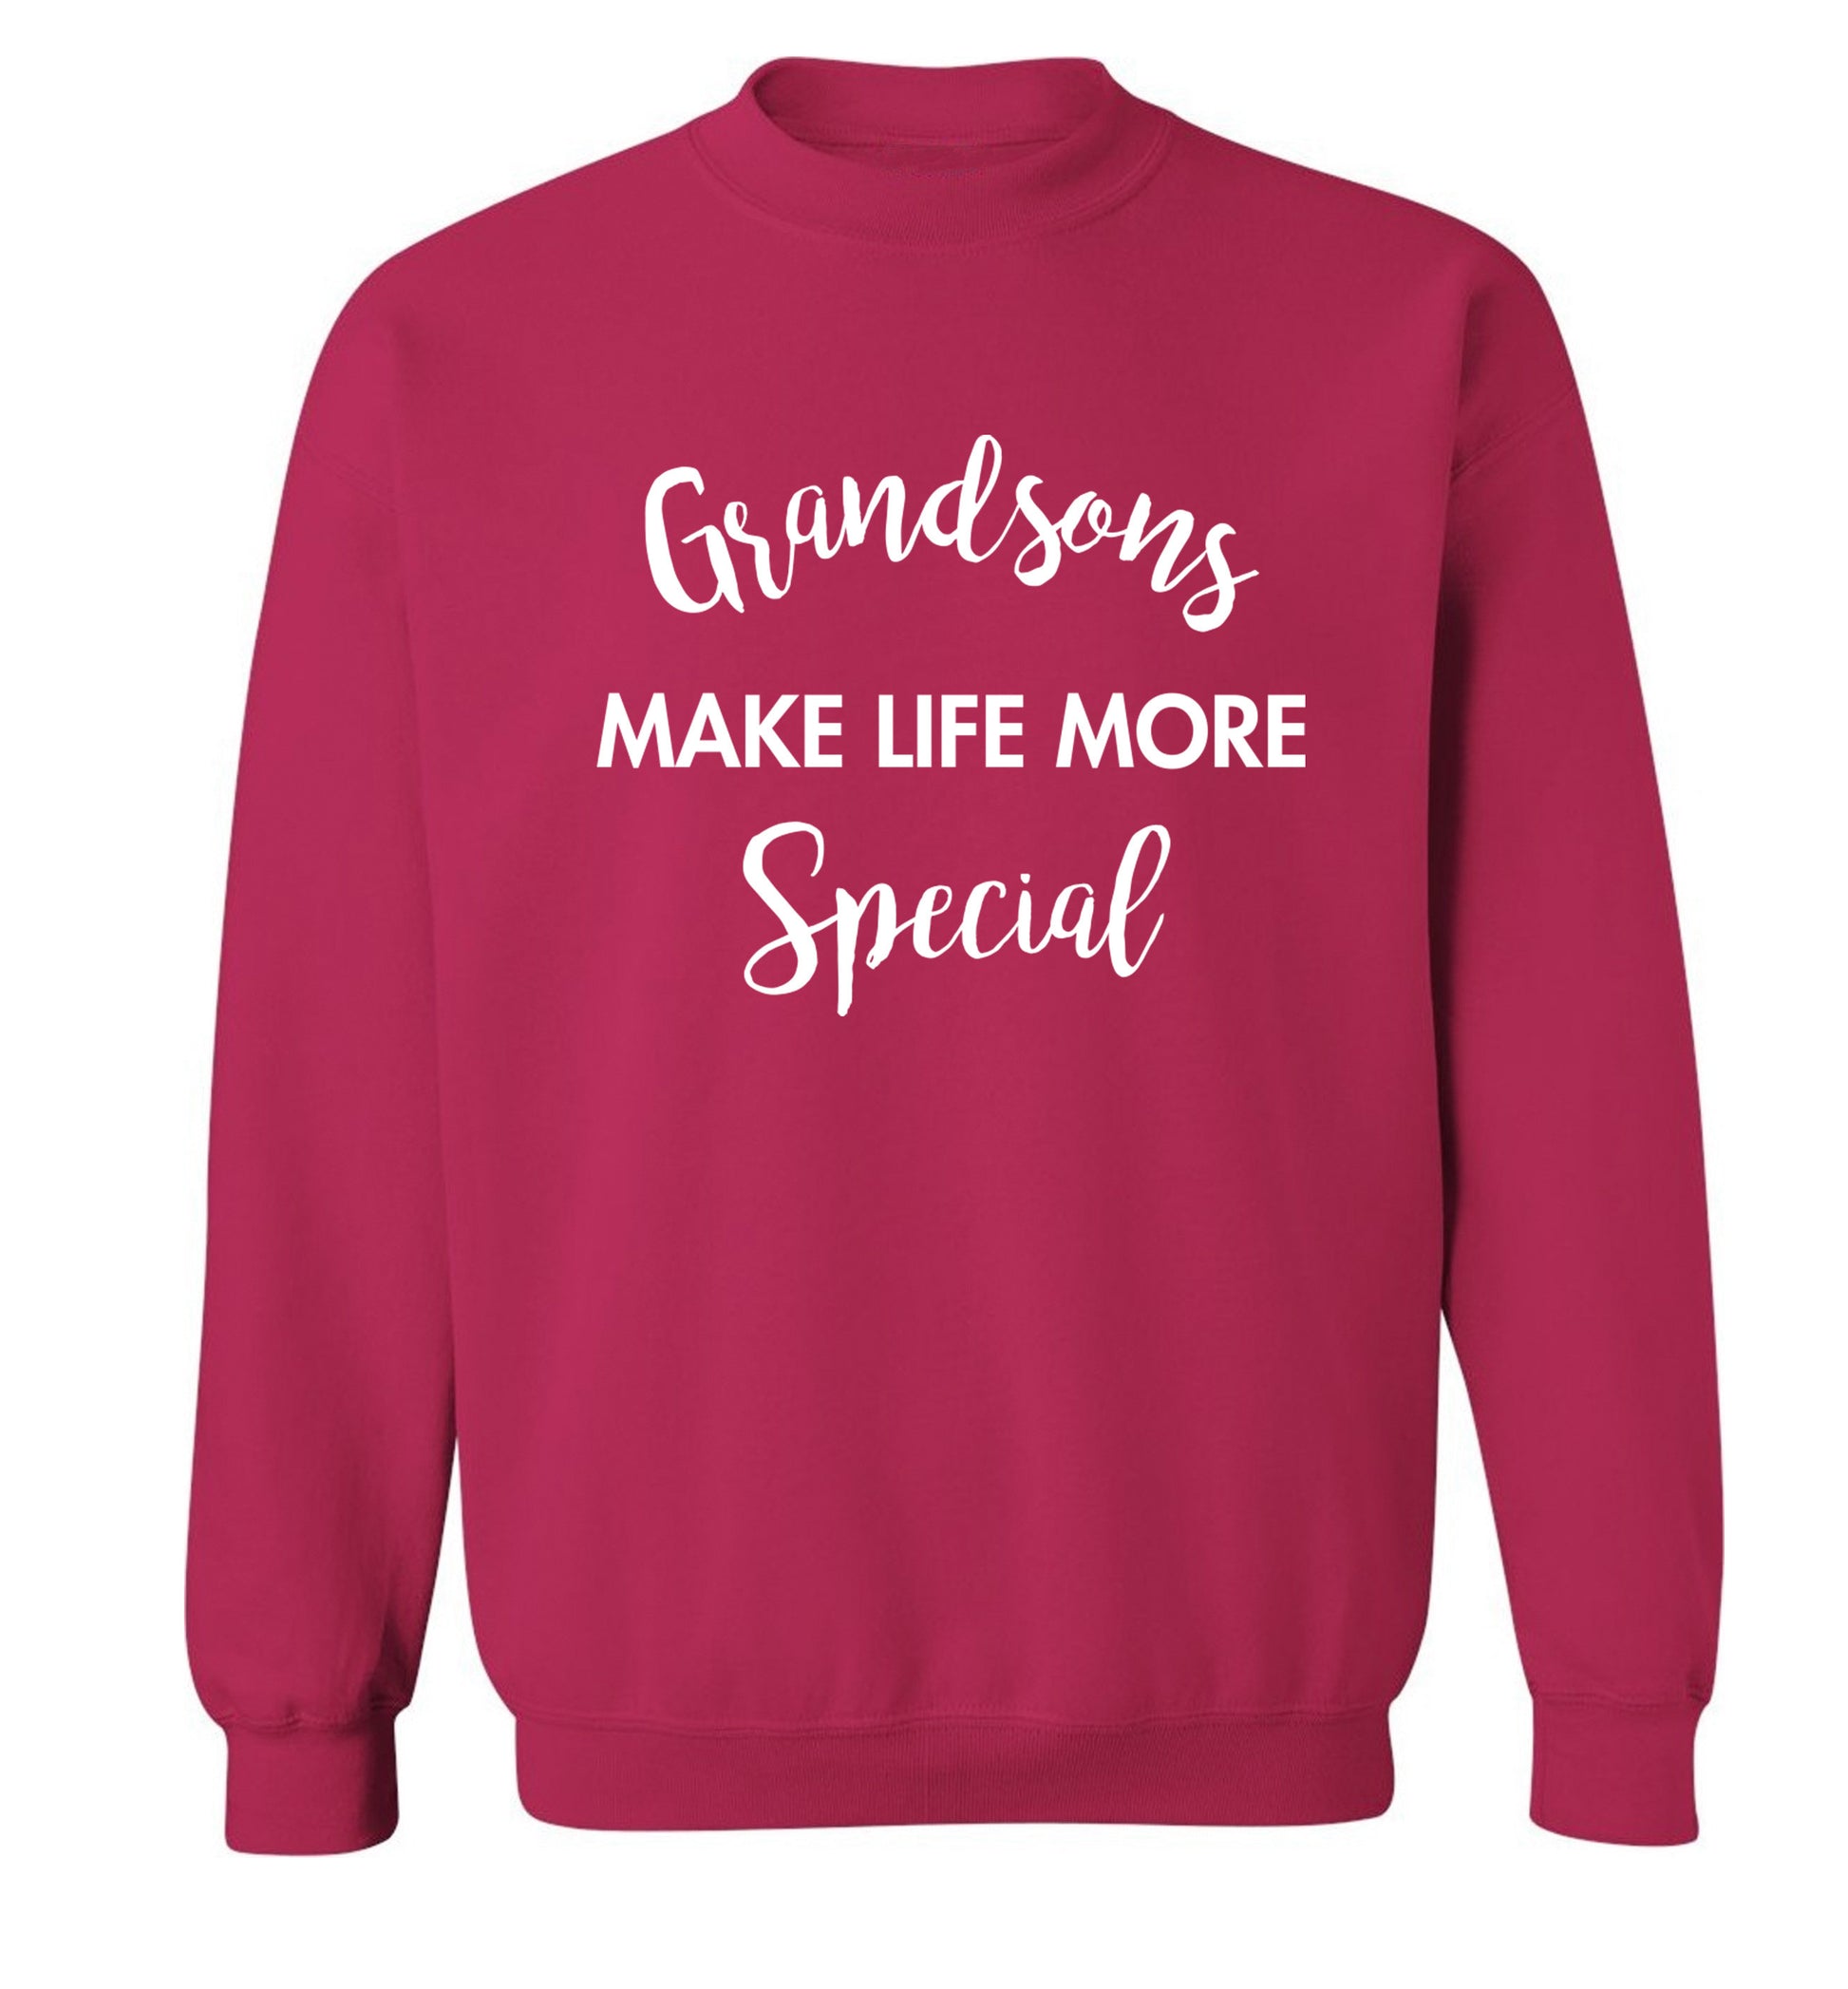 Grandsons make life more special Adult's unisex pink Sweater 2XL